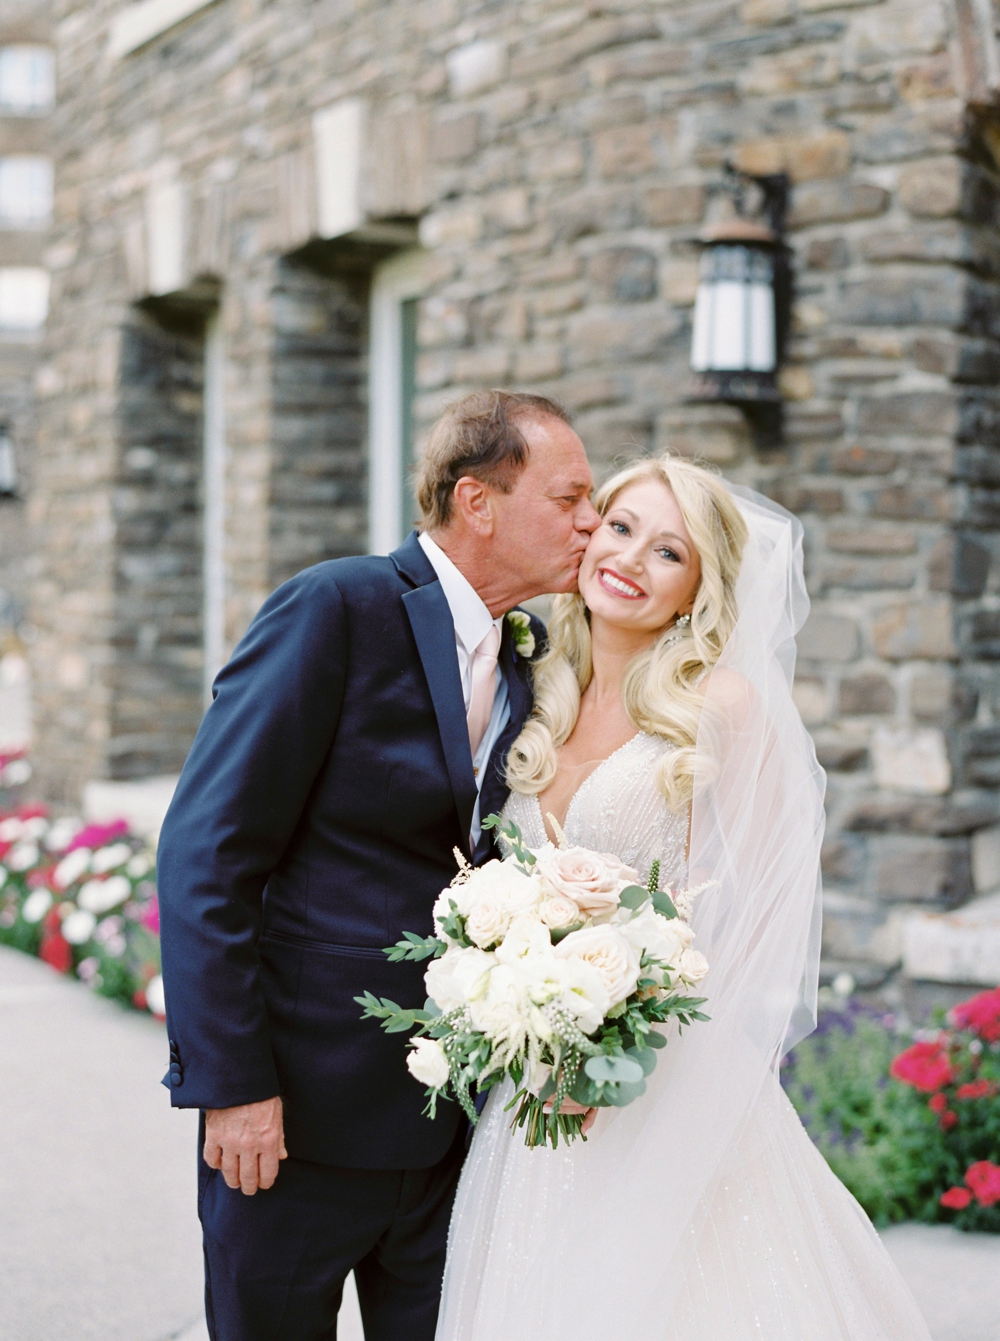 Bride and her dad at the Fairmont Banff Springs Hotel | Banff Rocky Mountain Wedding Photographers | Justine Milton fine art film photography